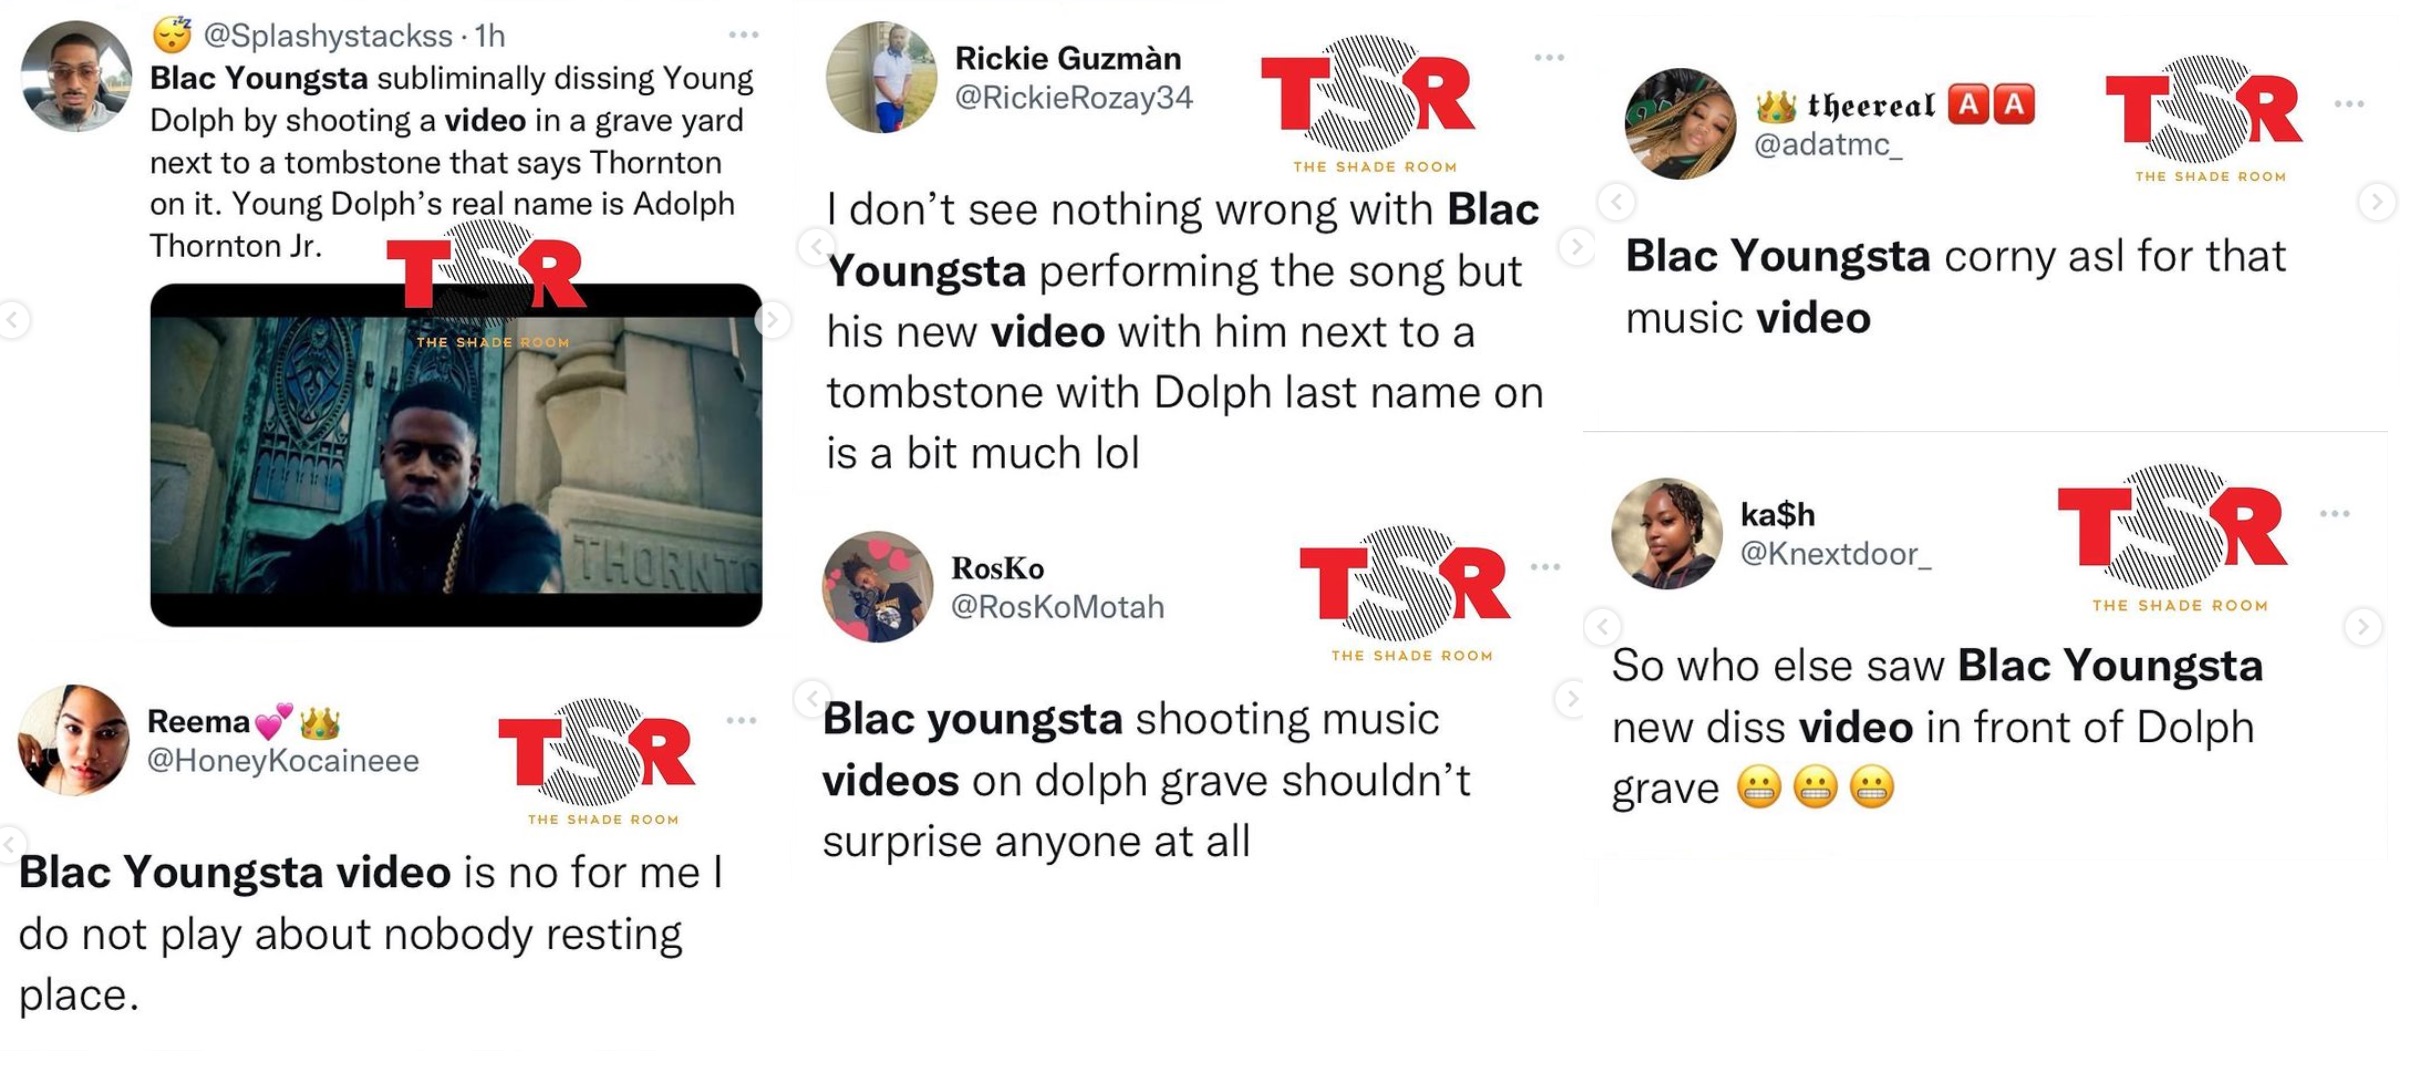 Blac Youngsta uses Young Dolph's last name on tombstone in new video